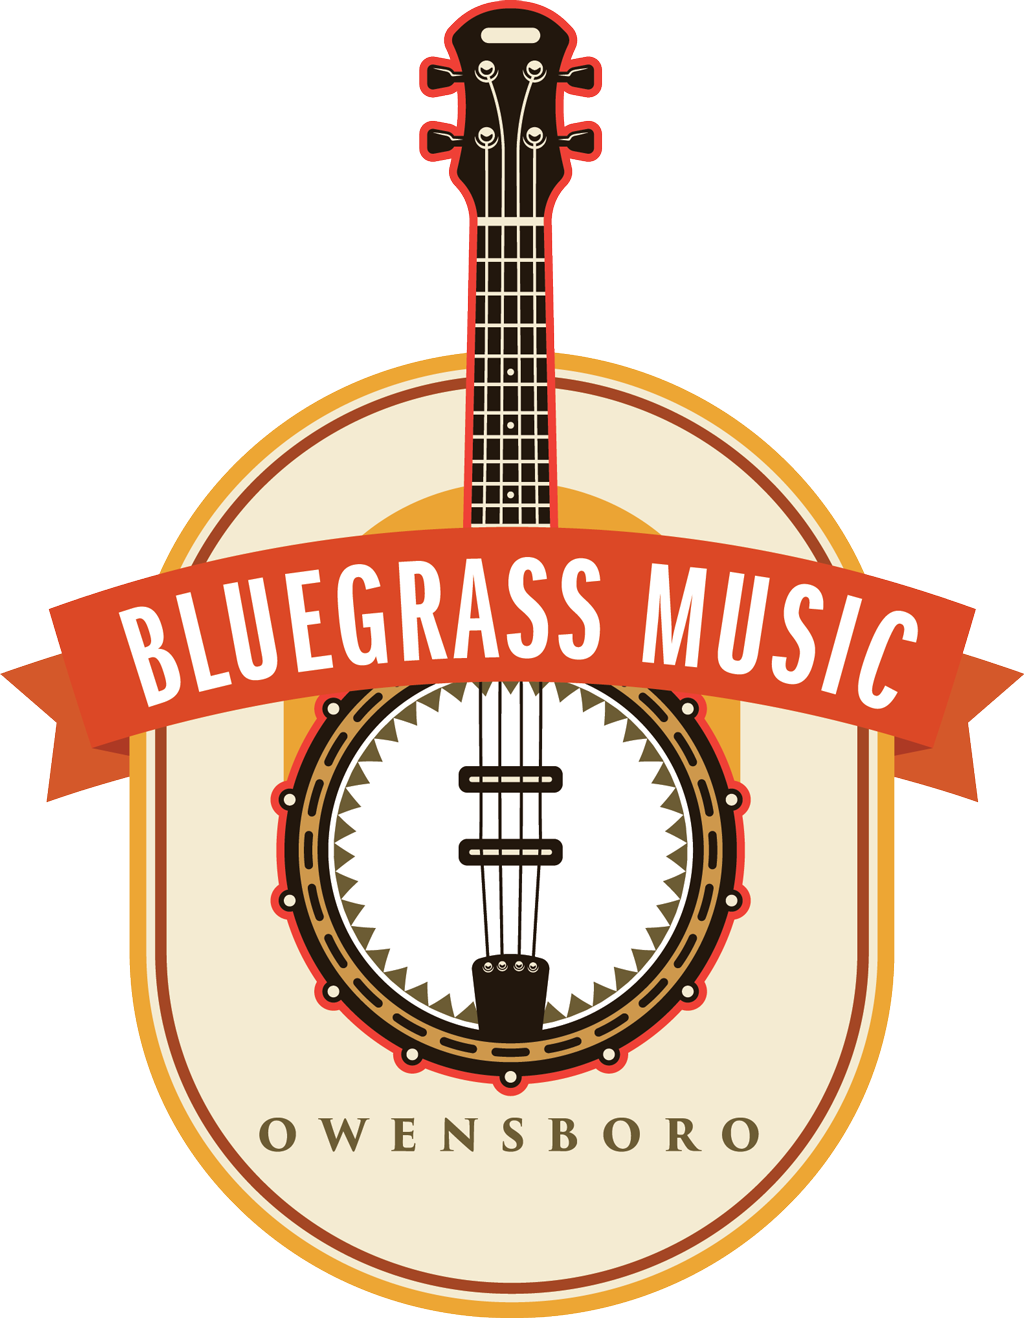 Owensboro – The Bluegrass Music Capital of the World